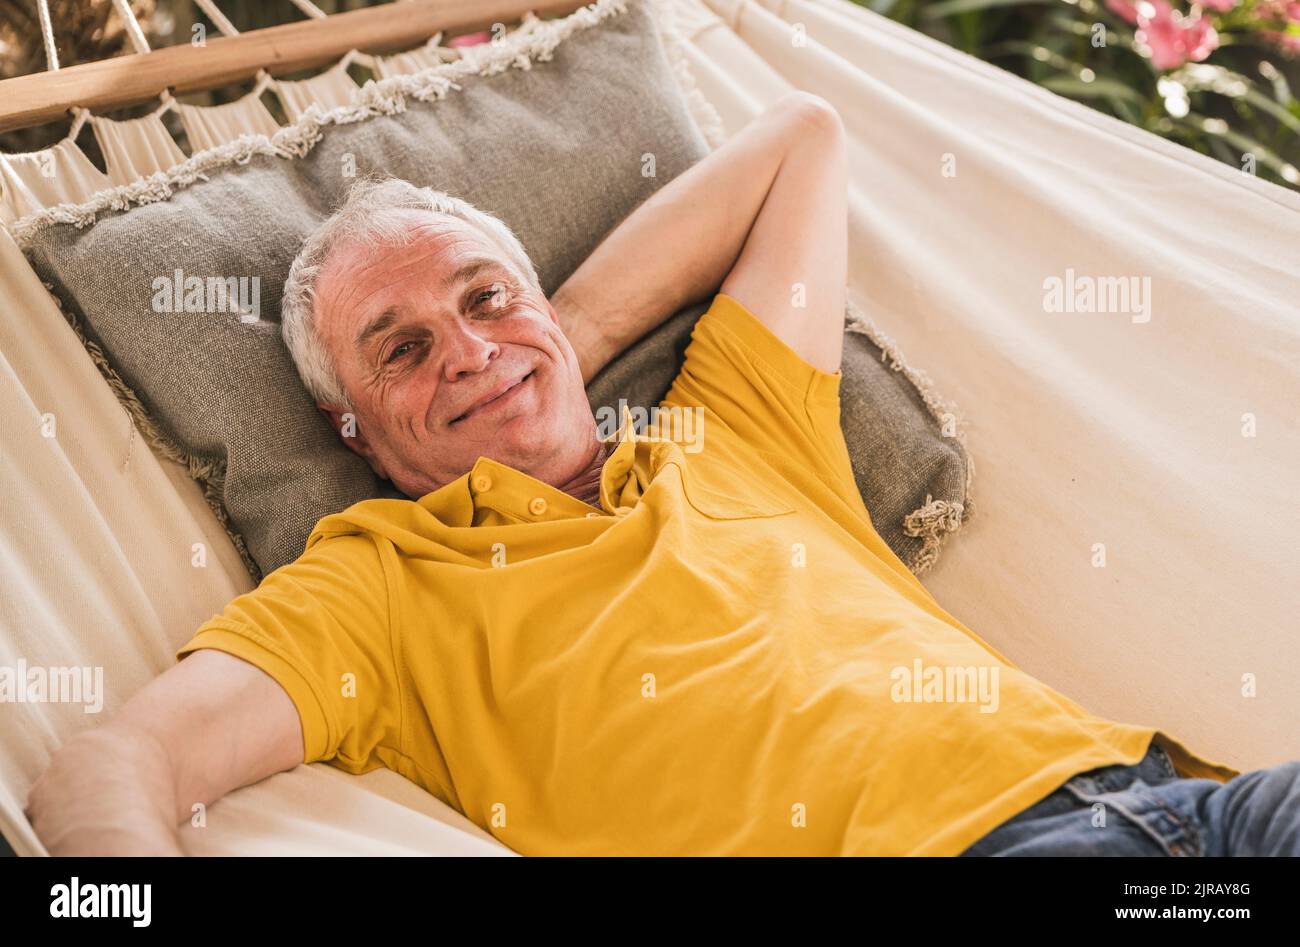 Smiling retired senior man with hand behind head relaxing in hammock Stock Photo